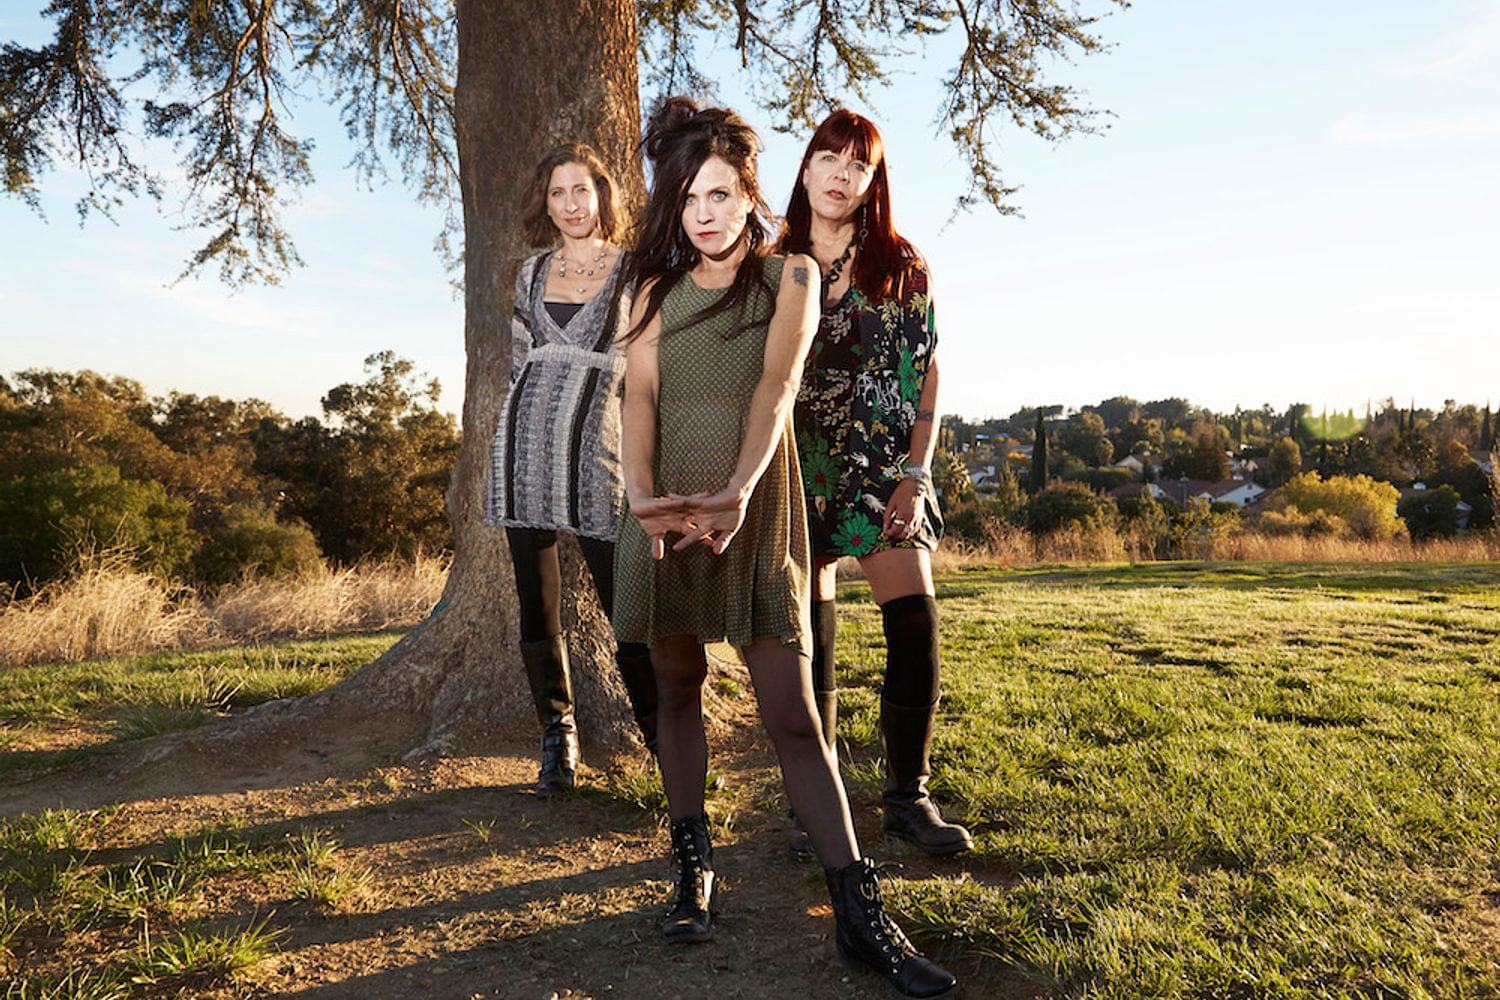 Babes in Toyland: "We have a whole new generation of fans”